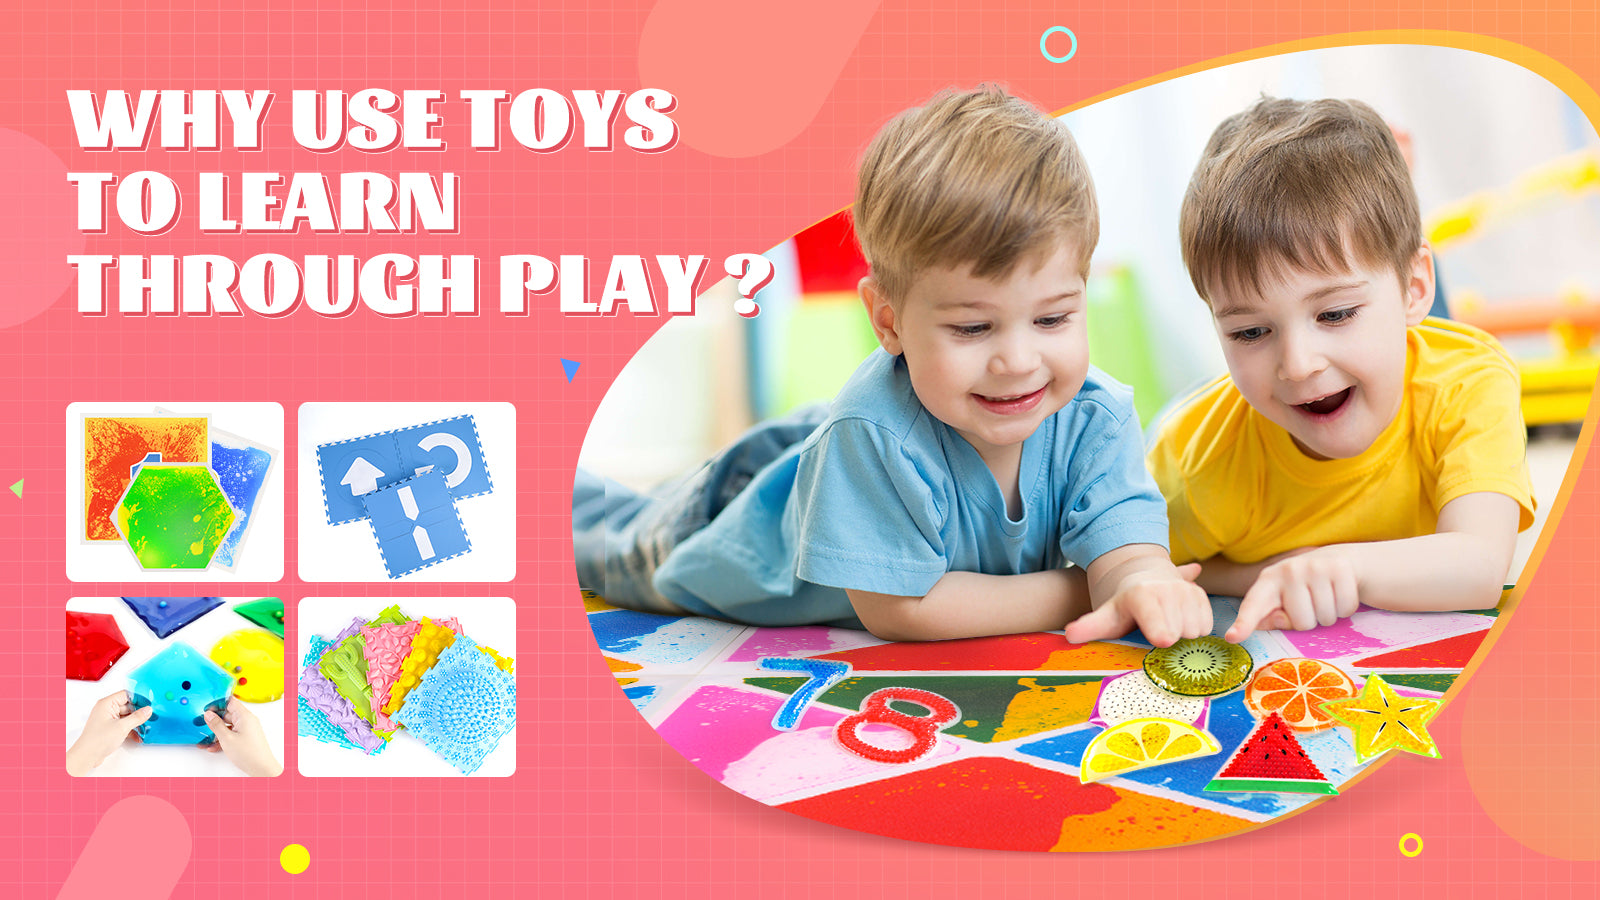 WHY USE TOYS TO LEARN THROUGH PLAY ?